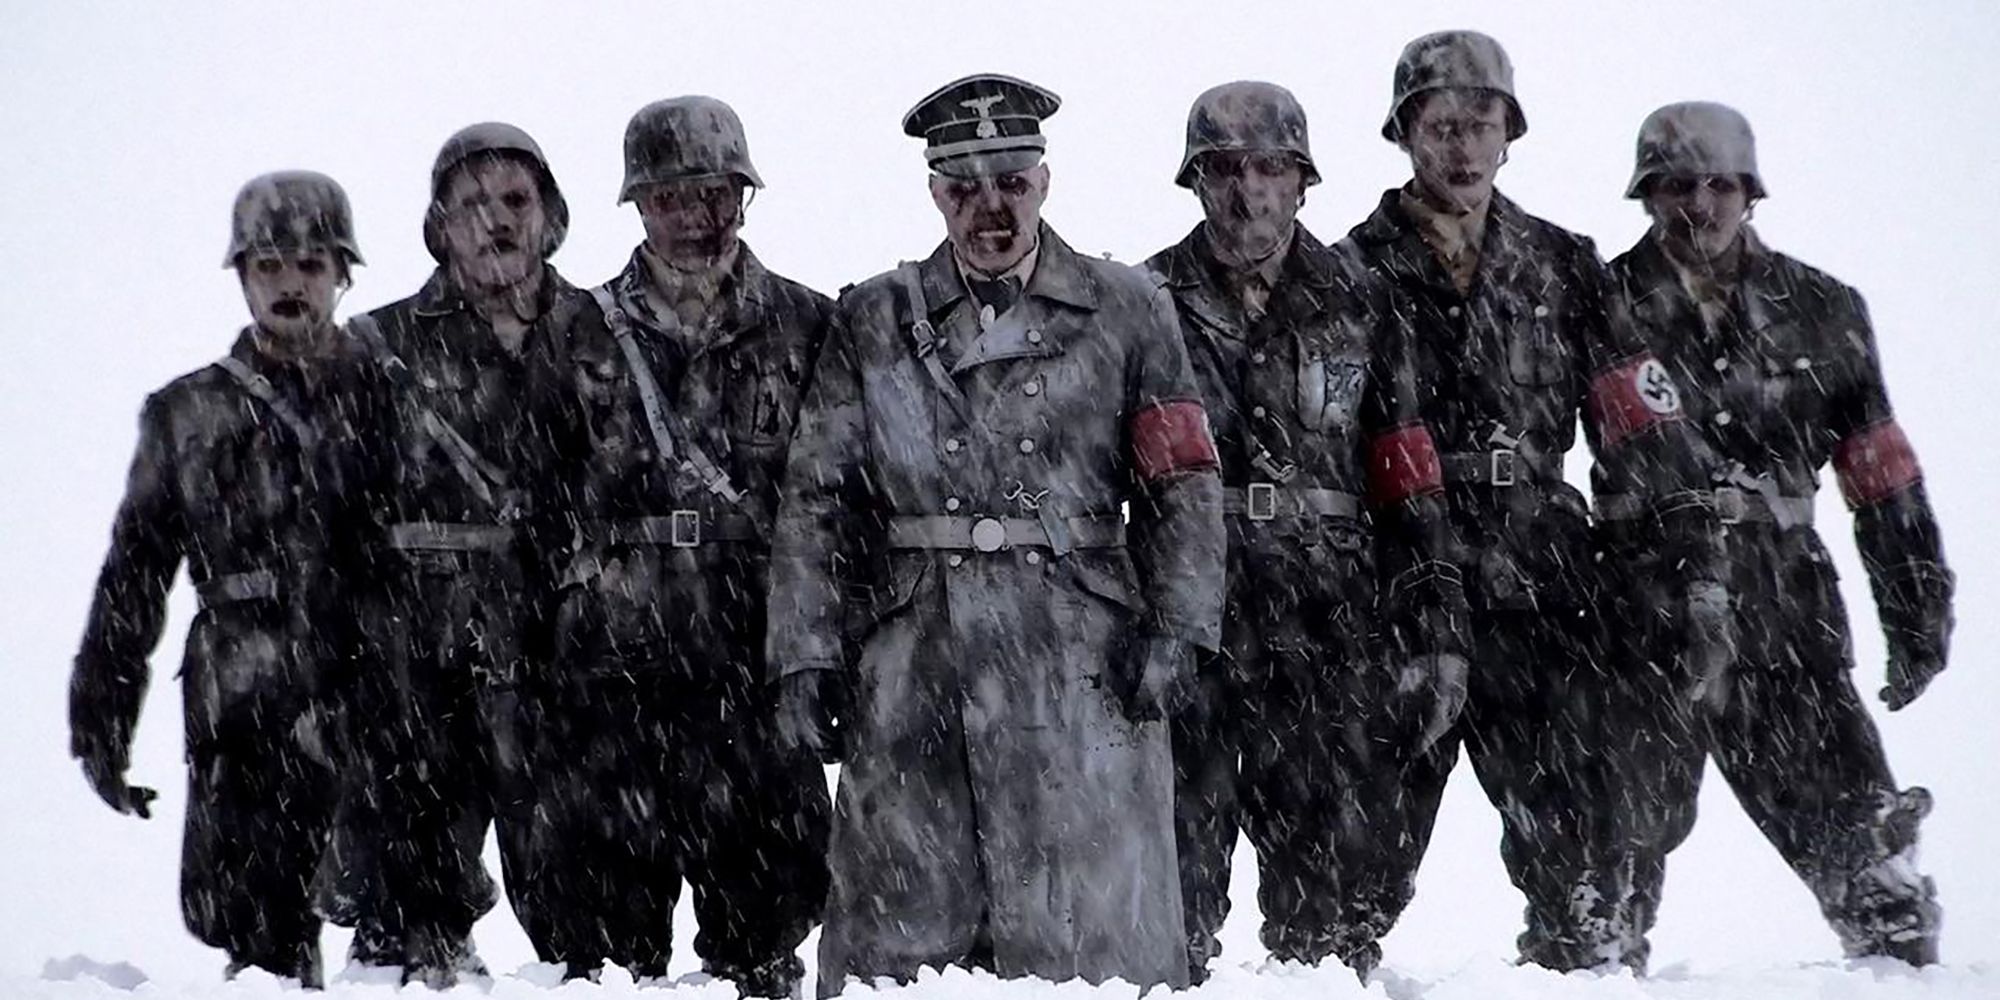 The Zombies In Dead Snow